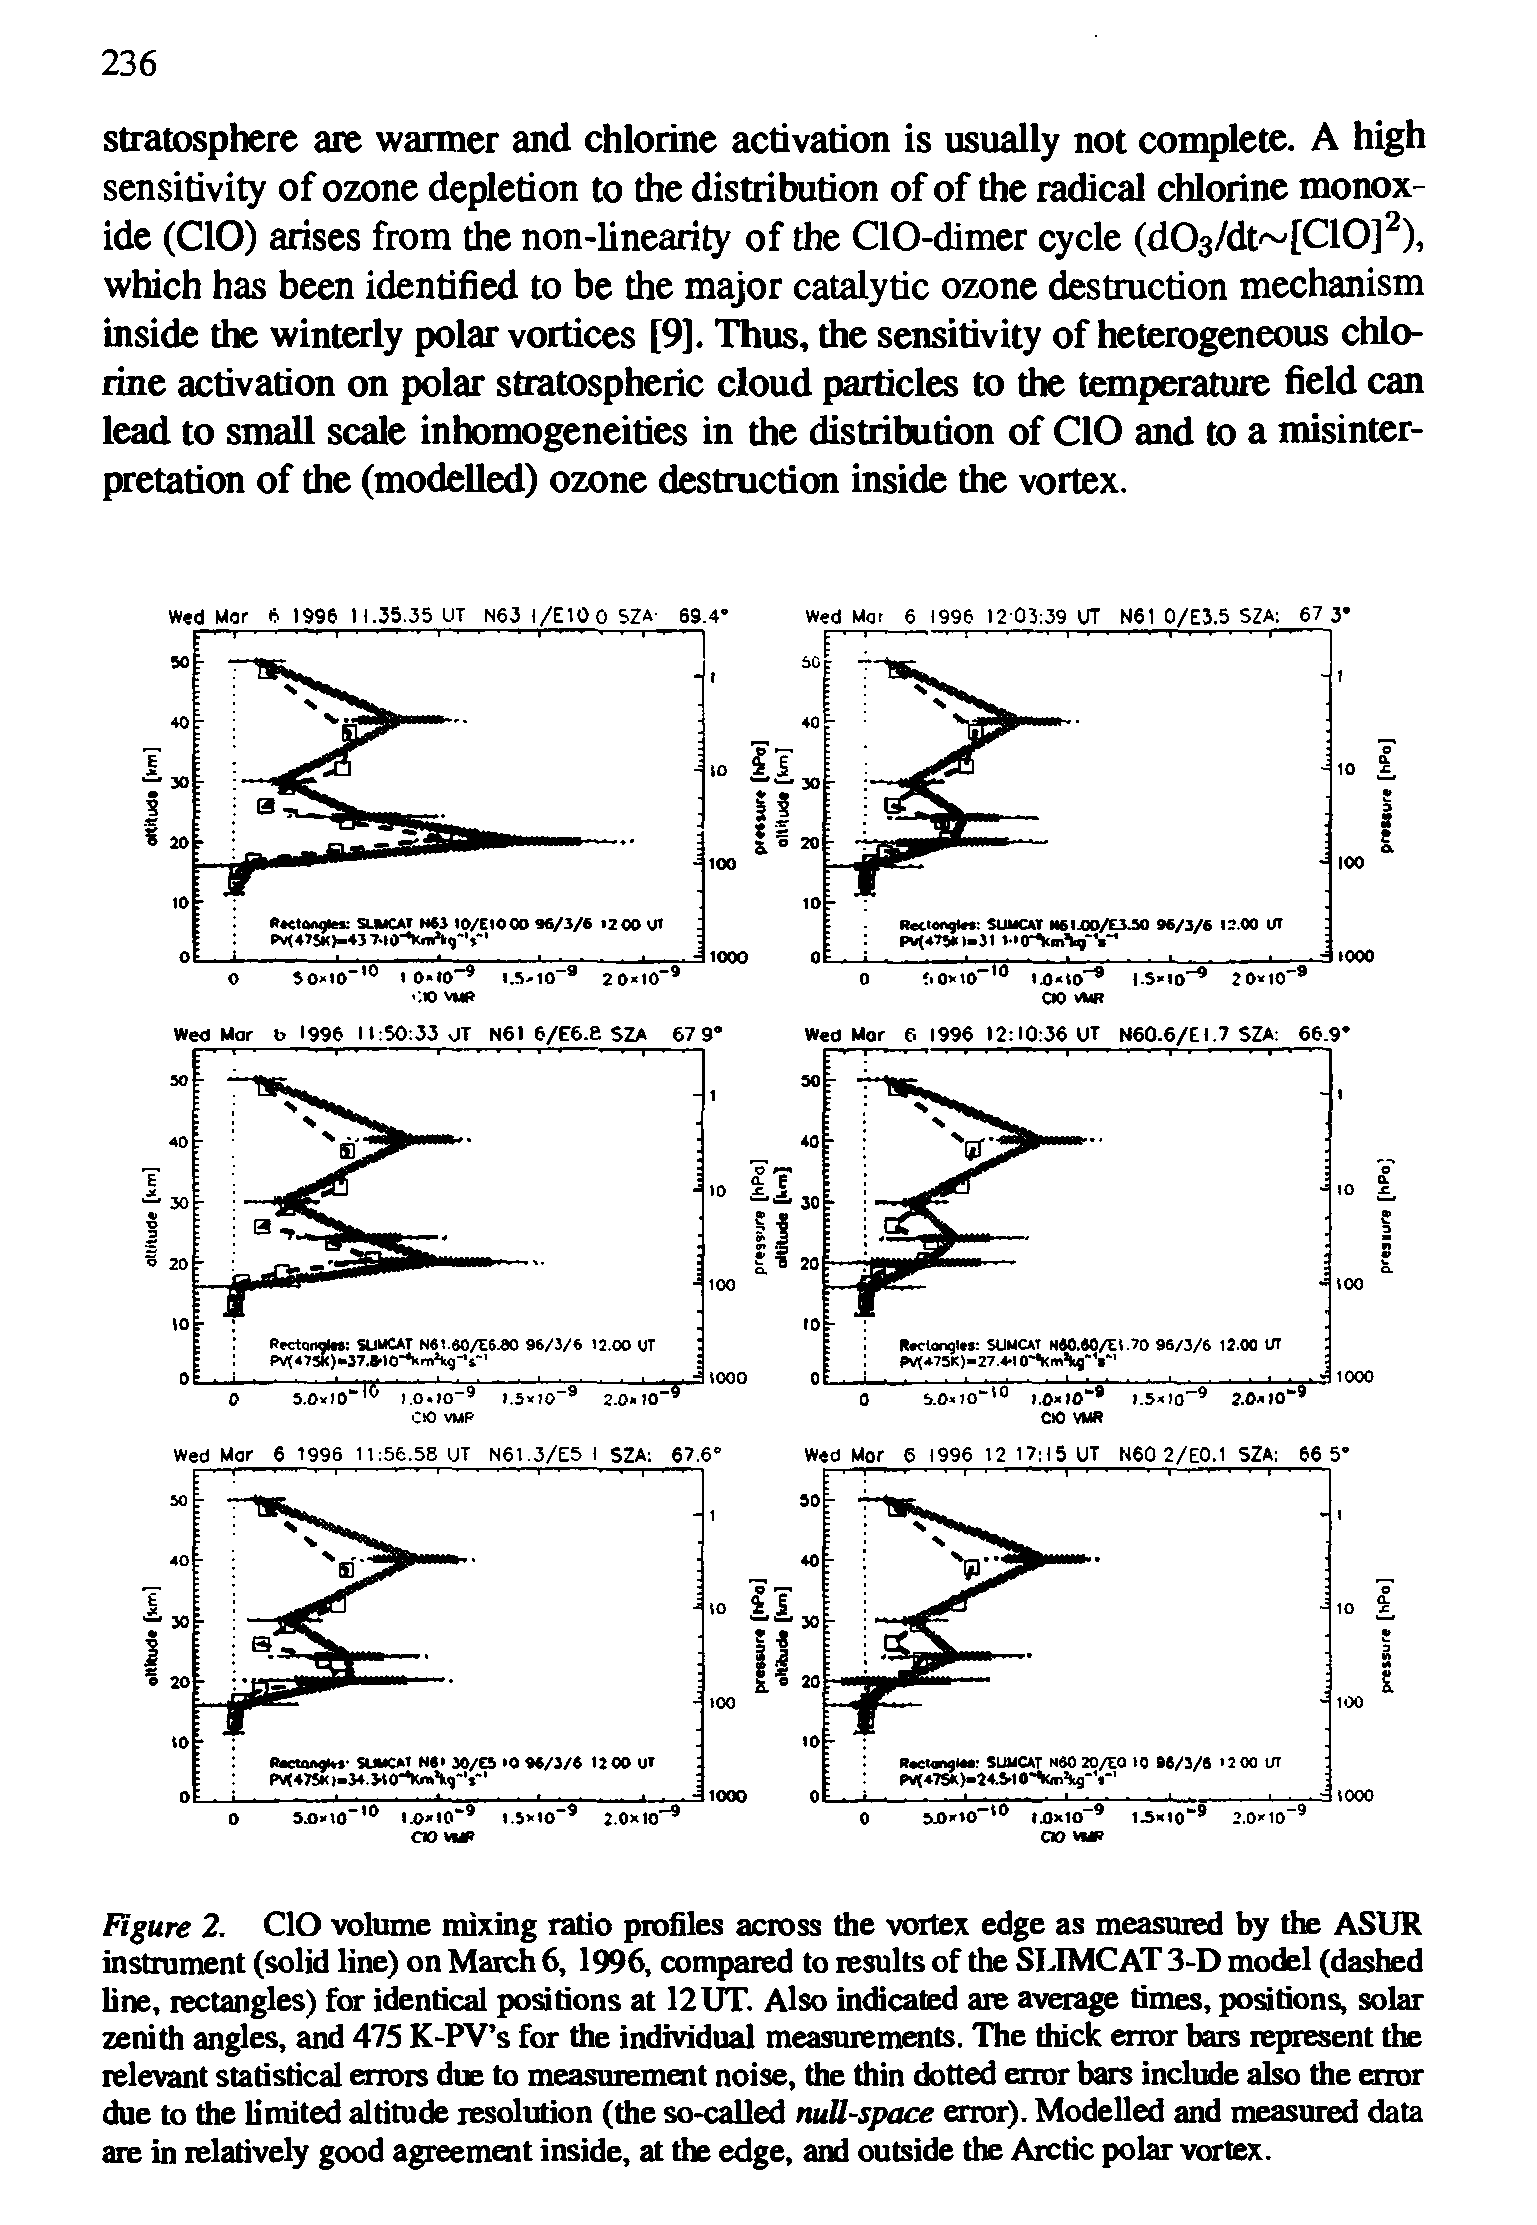 Figure 2. CIO volume mixing ratio profiles across the vortex edge as measured by the ASUR instrument (solid line) on March 6, 1996, compared to results of the SI.IMCAT 3-D model (dashed line, rectangles) for identical positions at 12 UT. Also indicated are average times, positions, solar zenith angles, and 475 K-PV s for the individual measurements. The thick error bars represent the relevant statistical errors due to measurement noise, the thin dotted error bars include also the error due to the limited altitude resolution (the so-called null-space error). Modelled and measured data are in relatively good agreement inside, at the edge, and outside the Arctic polar vortex.